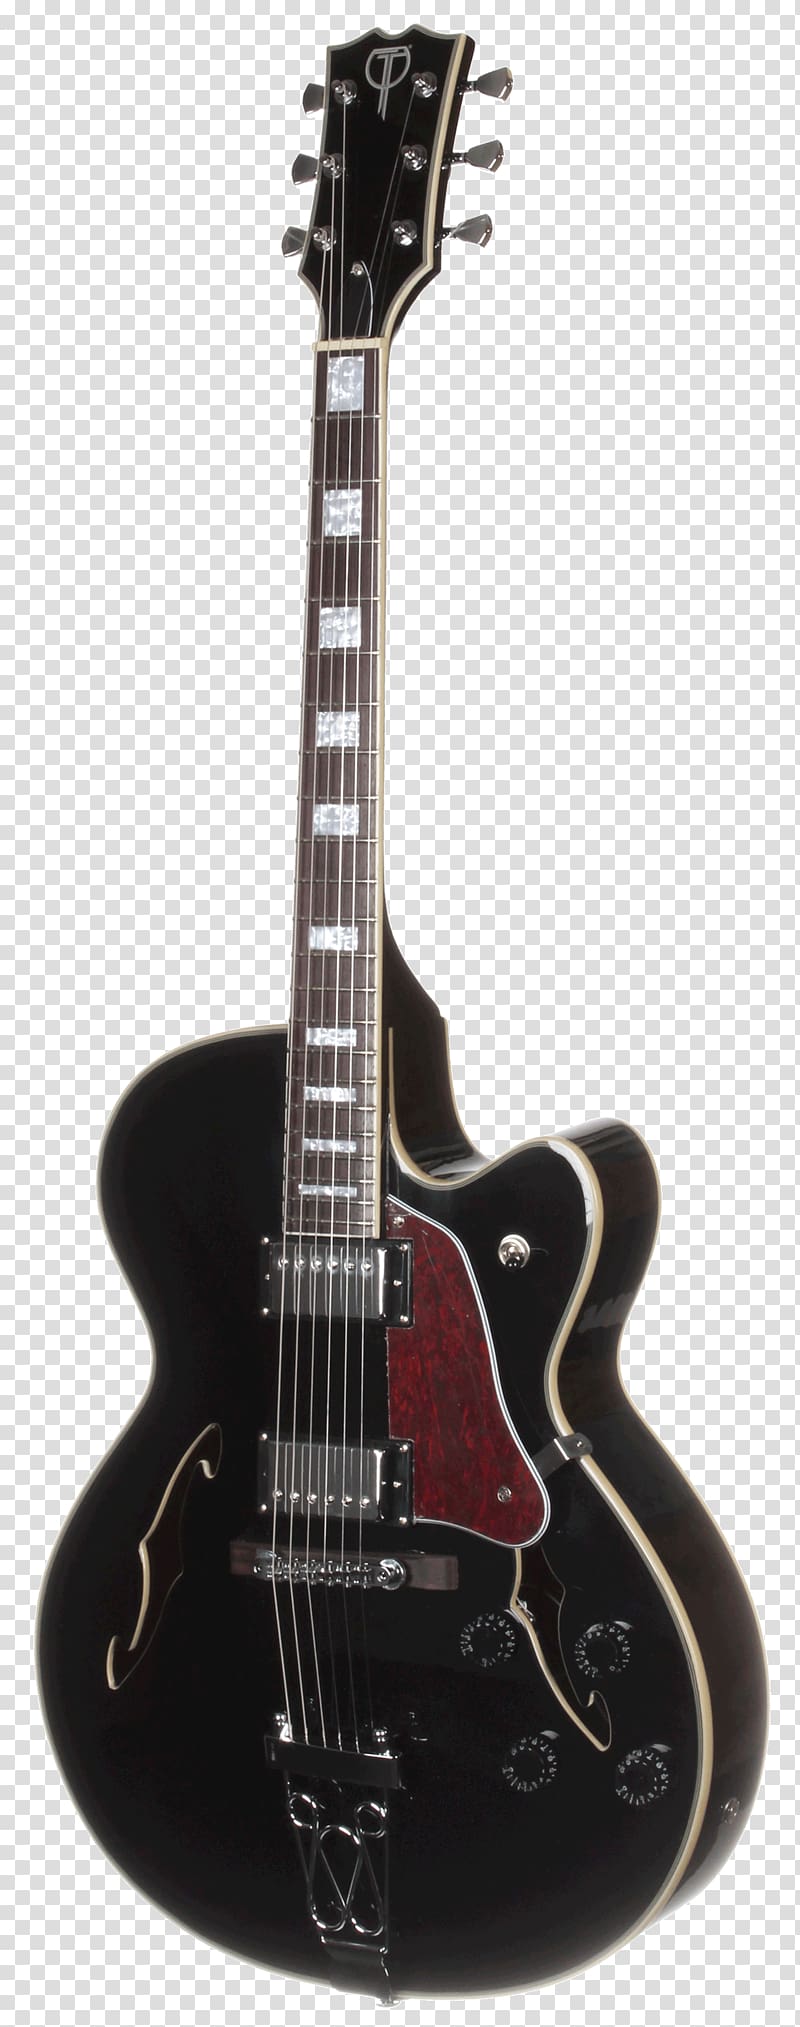 Epiphone Hummingbird PRO Acoustic-electric guitar Acoustic guitar, guitar transparent background PNG clipart